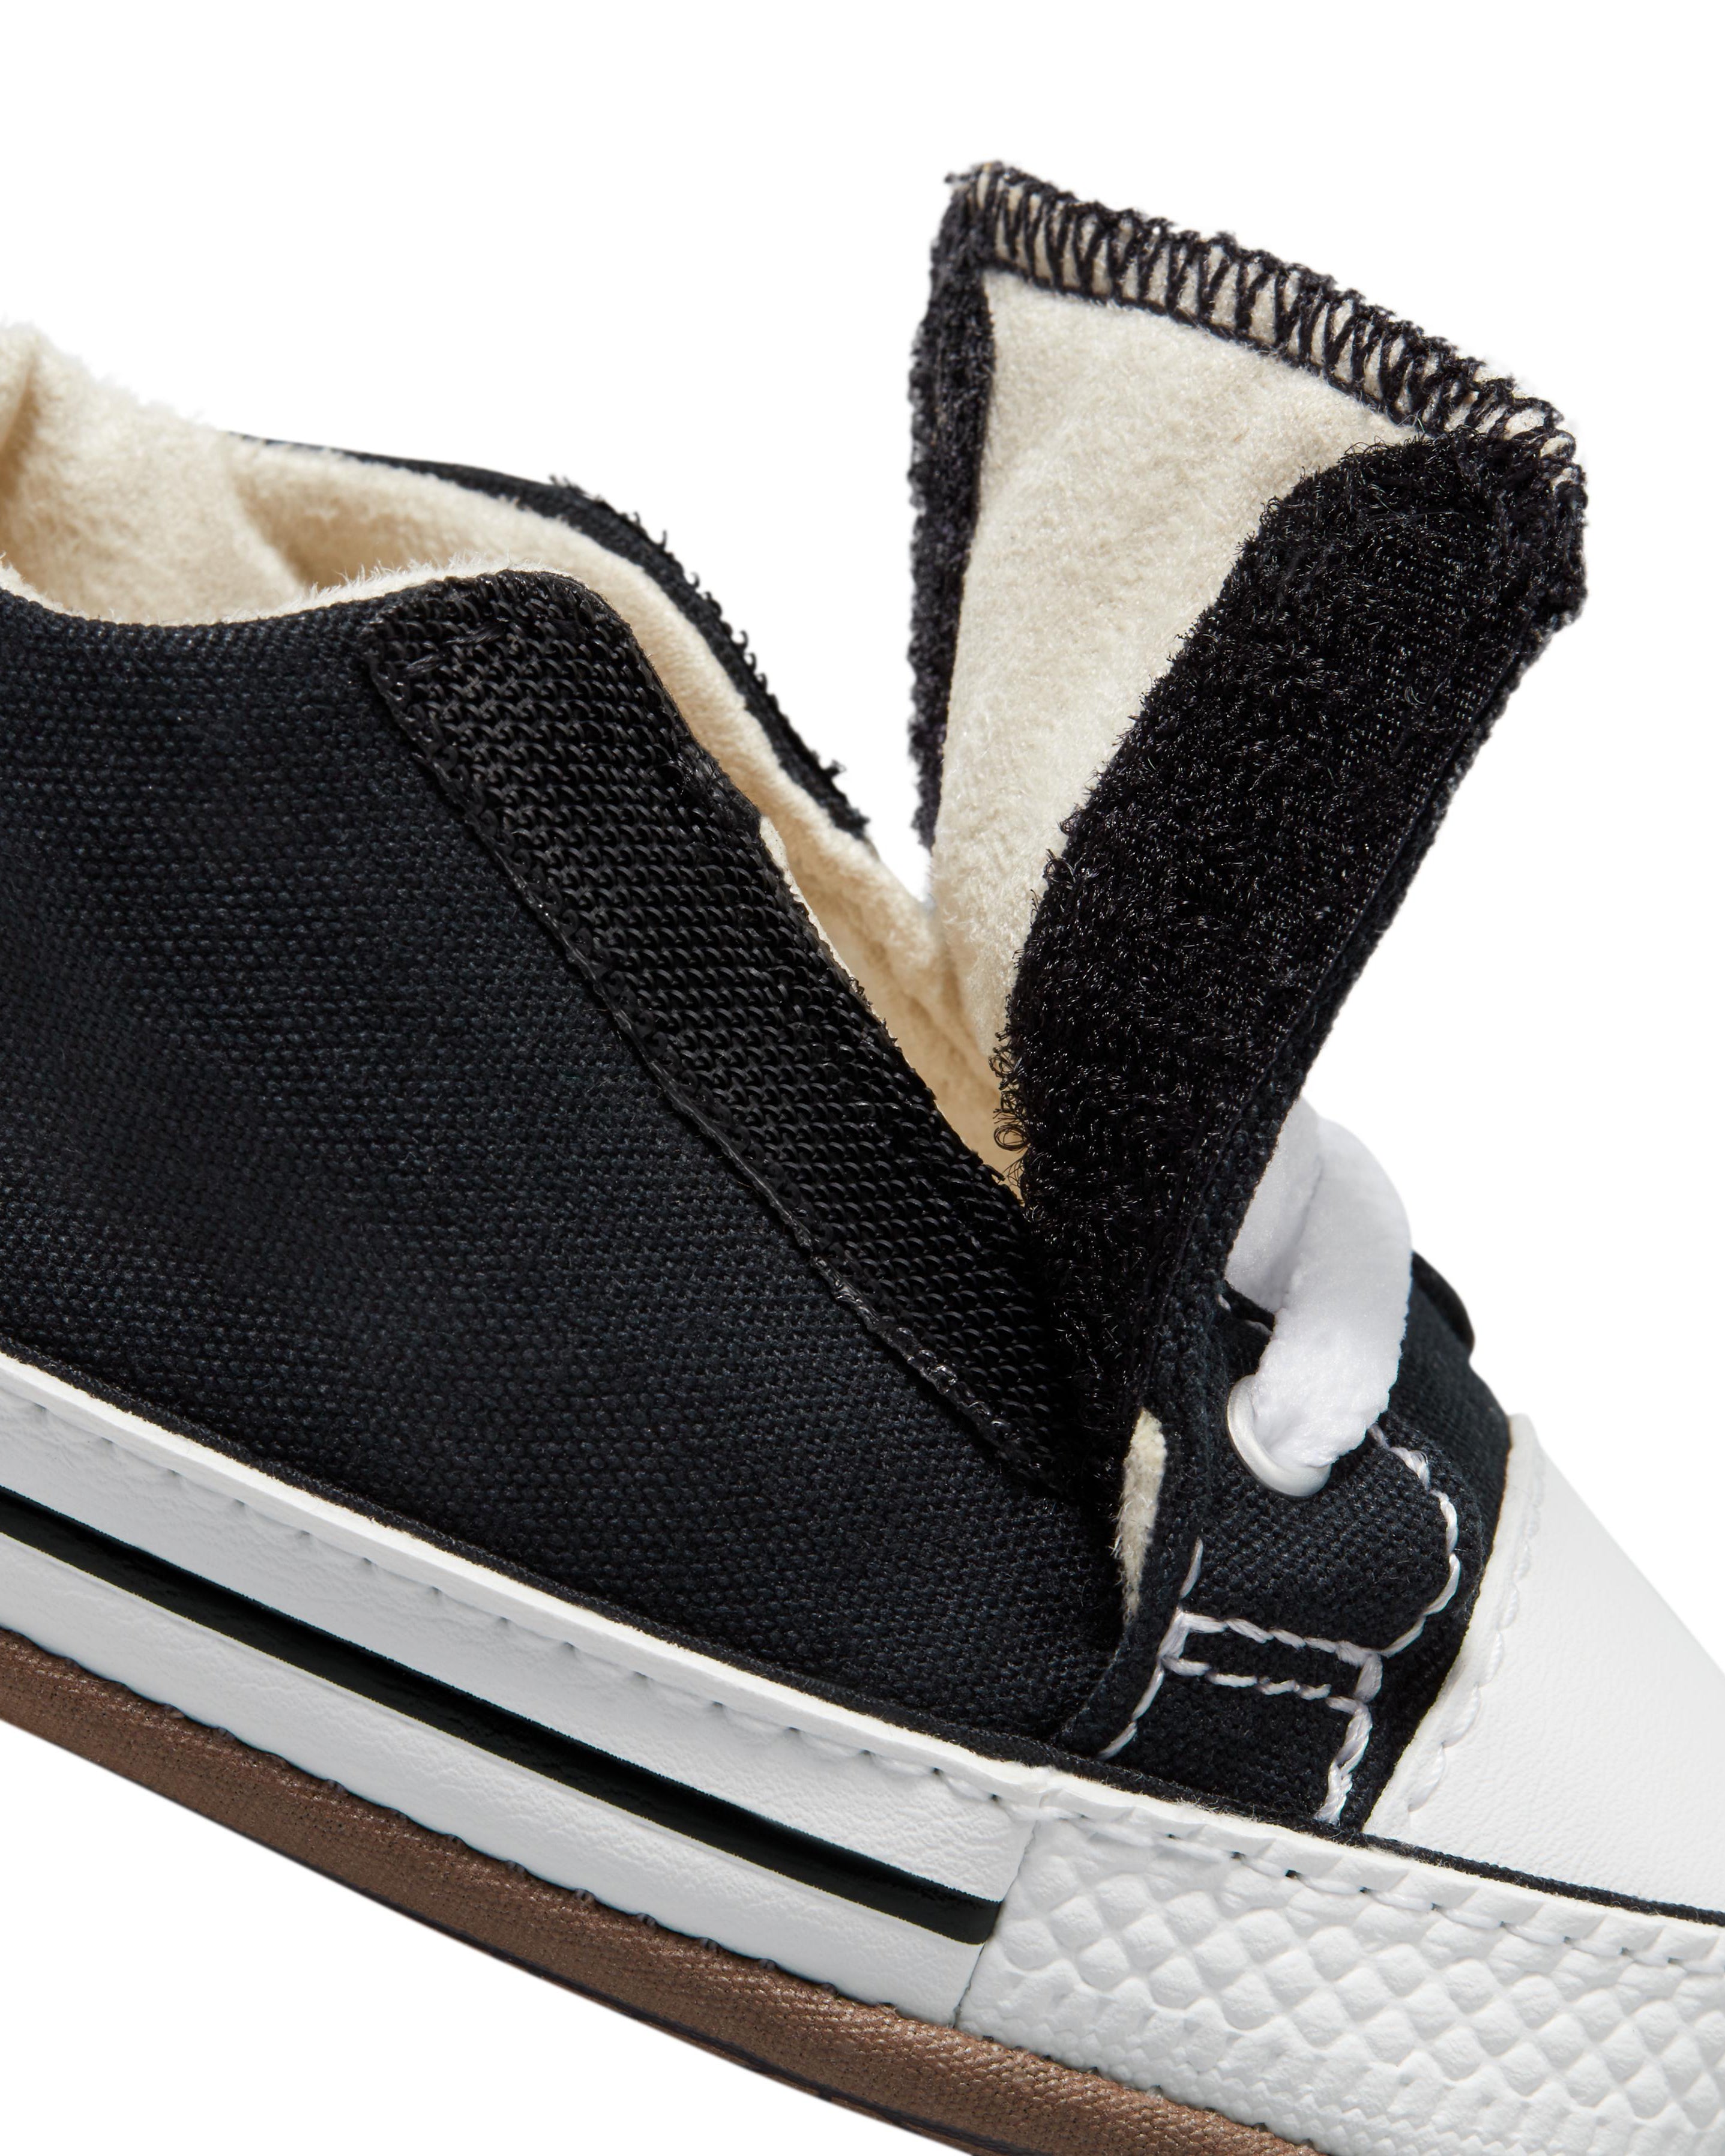 Converse Chuck Taylor Canvas Cribster Infants - Black/Natural Ivory/White